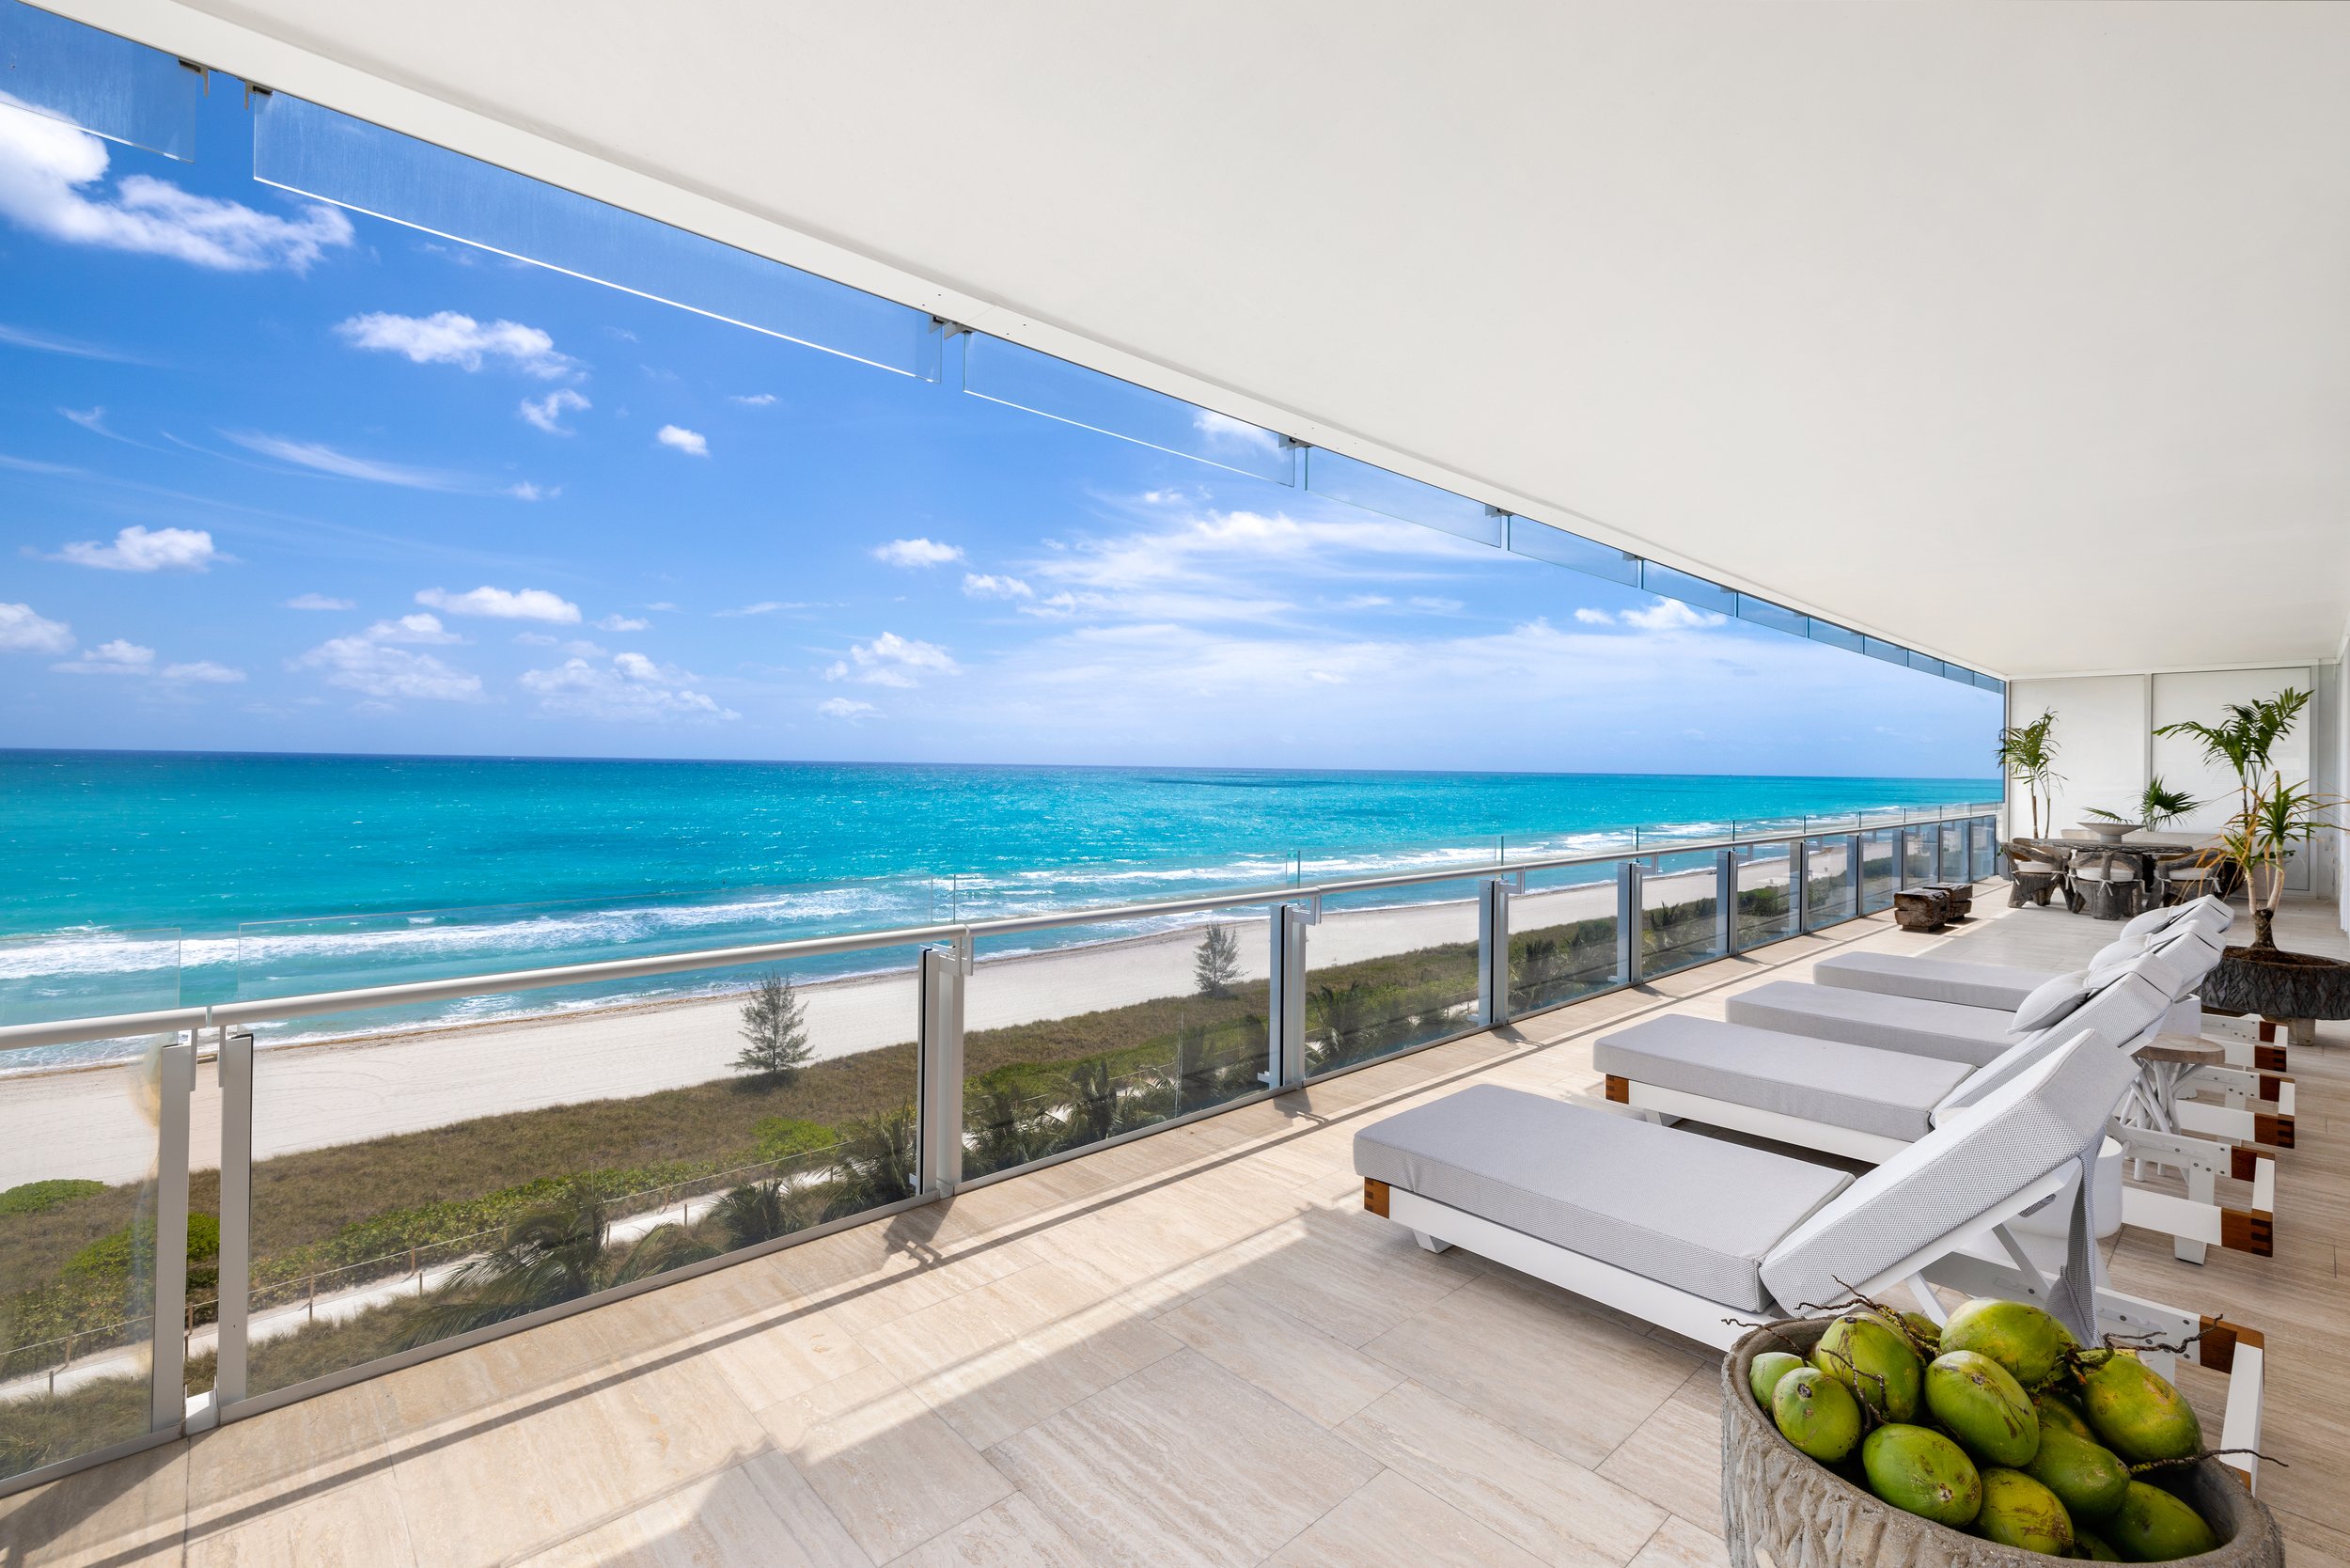 Check Out This Lavish Condo With Custom Wave Ceilings Asking $37 Million At Four Seasons at The Surf Club In Surfside 6.jpg